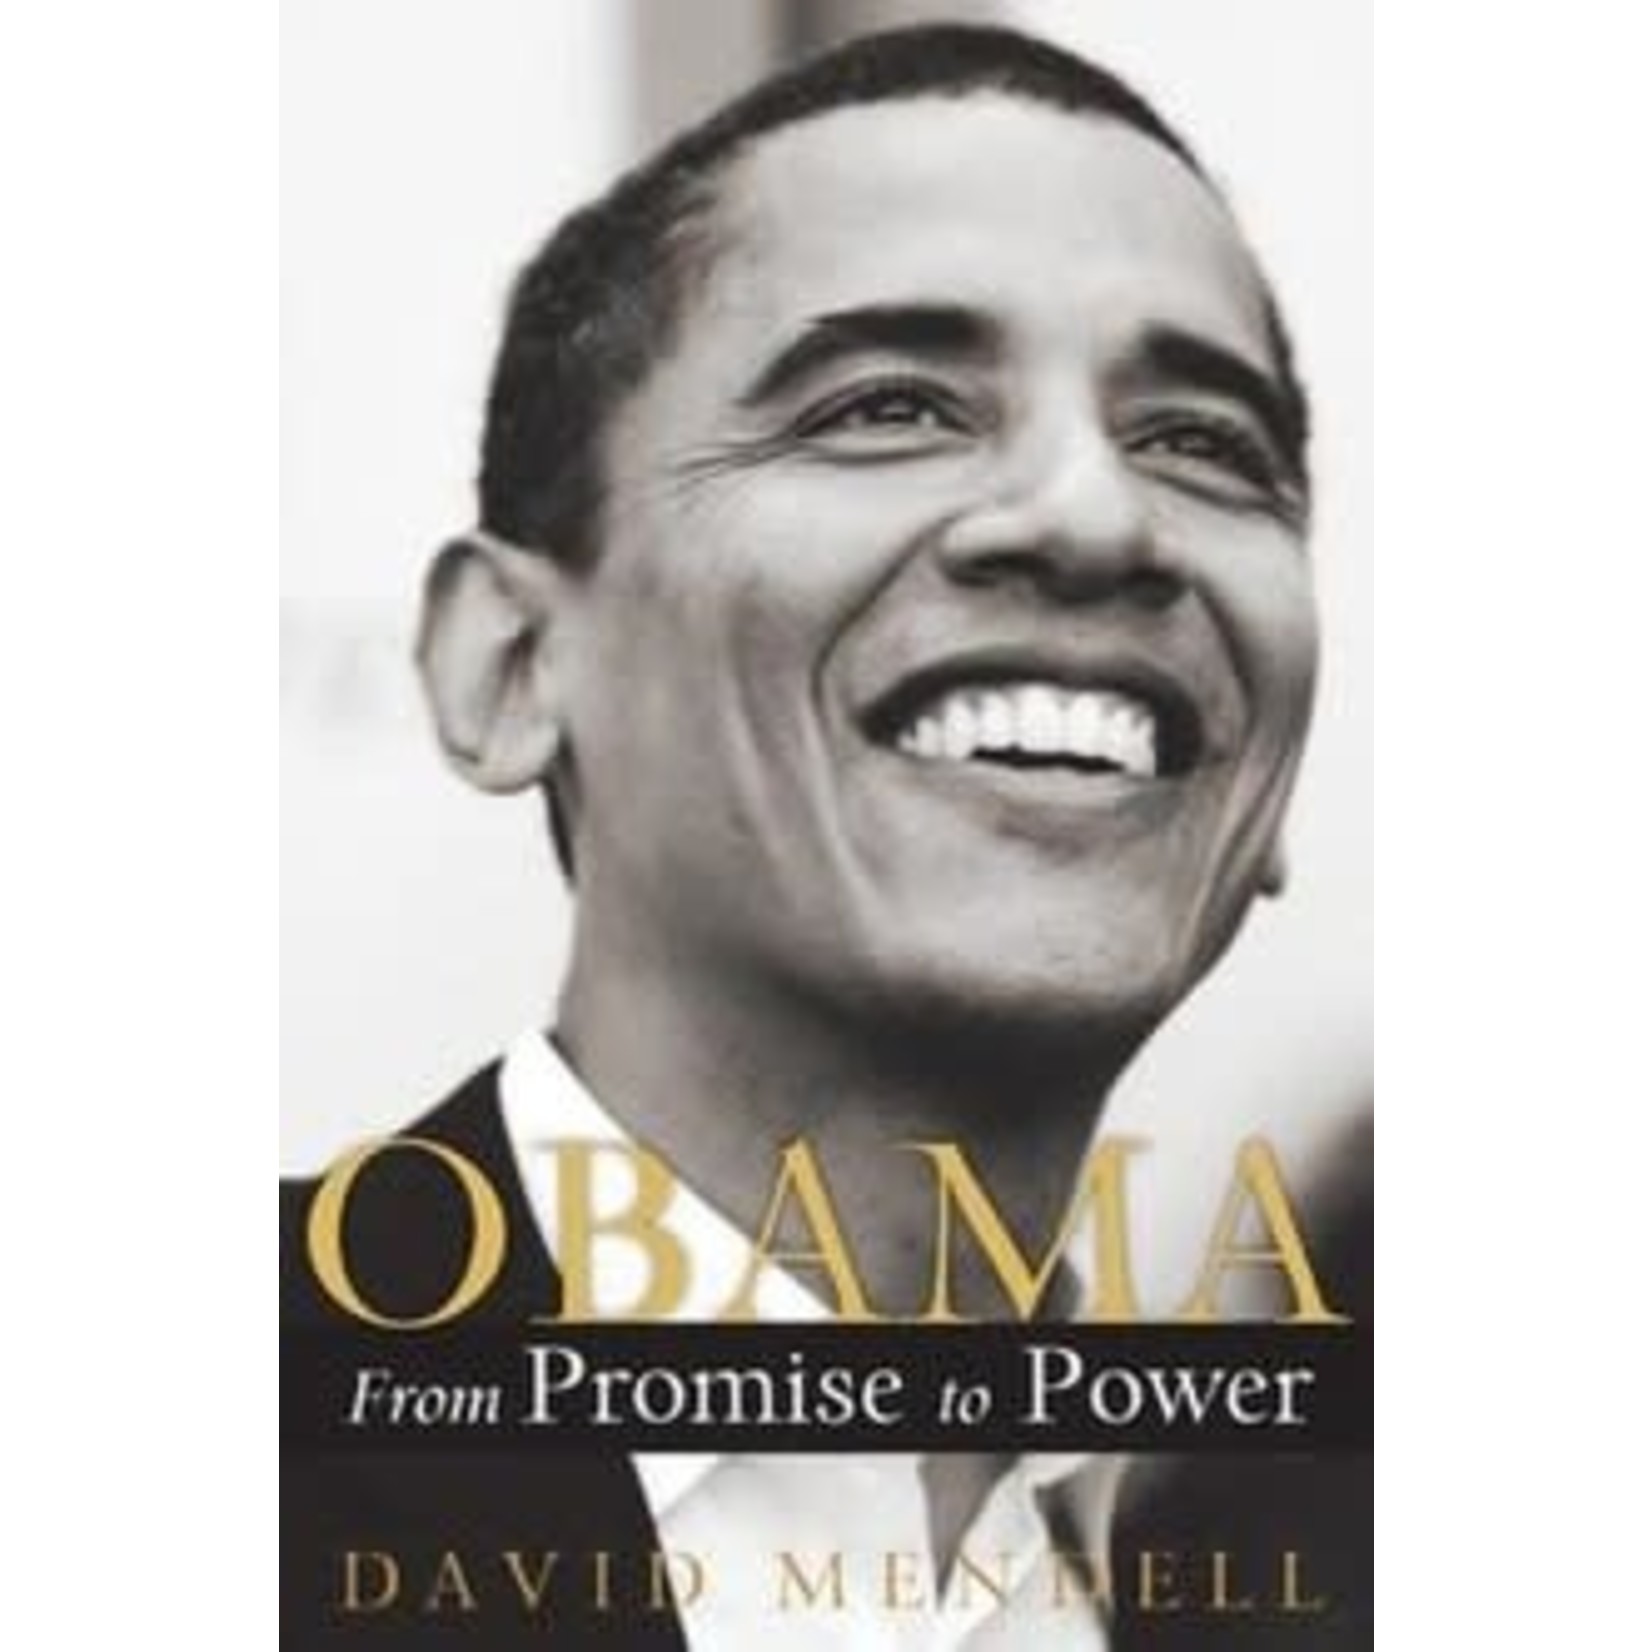 David Mendell Obama from Promise to Power